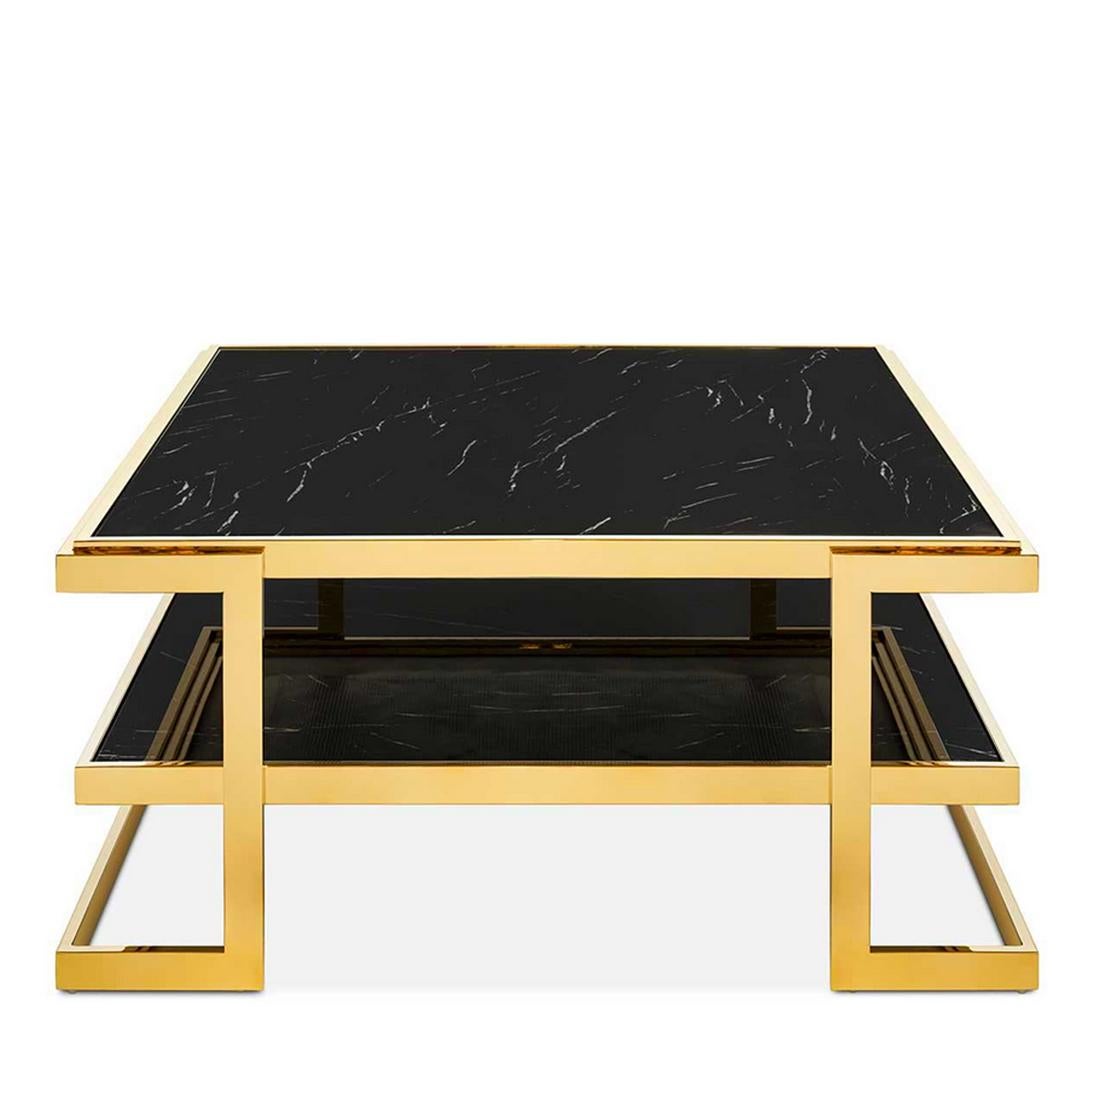 Coffee table Liz black with metal structure in
gold finish. With up and down black marble top.
Also available with up and down white marble top.